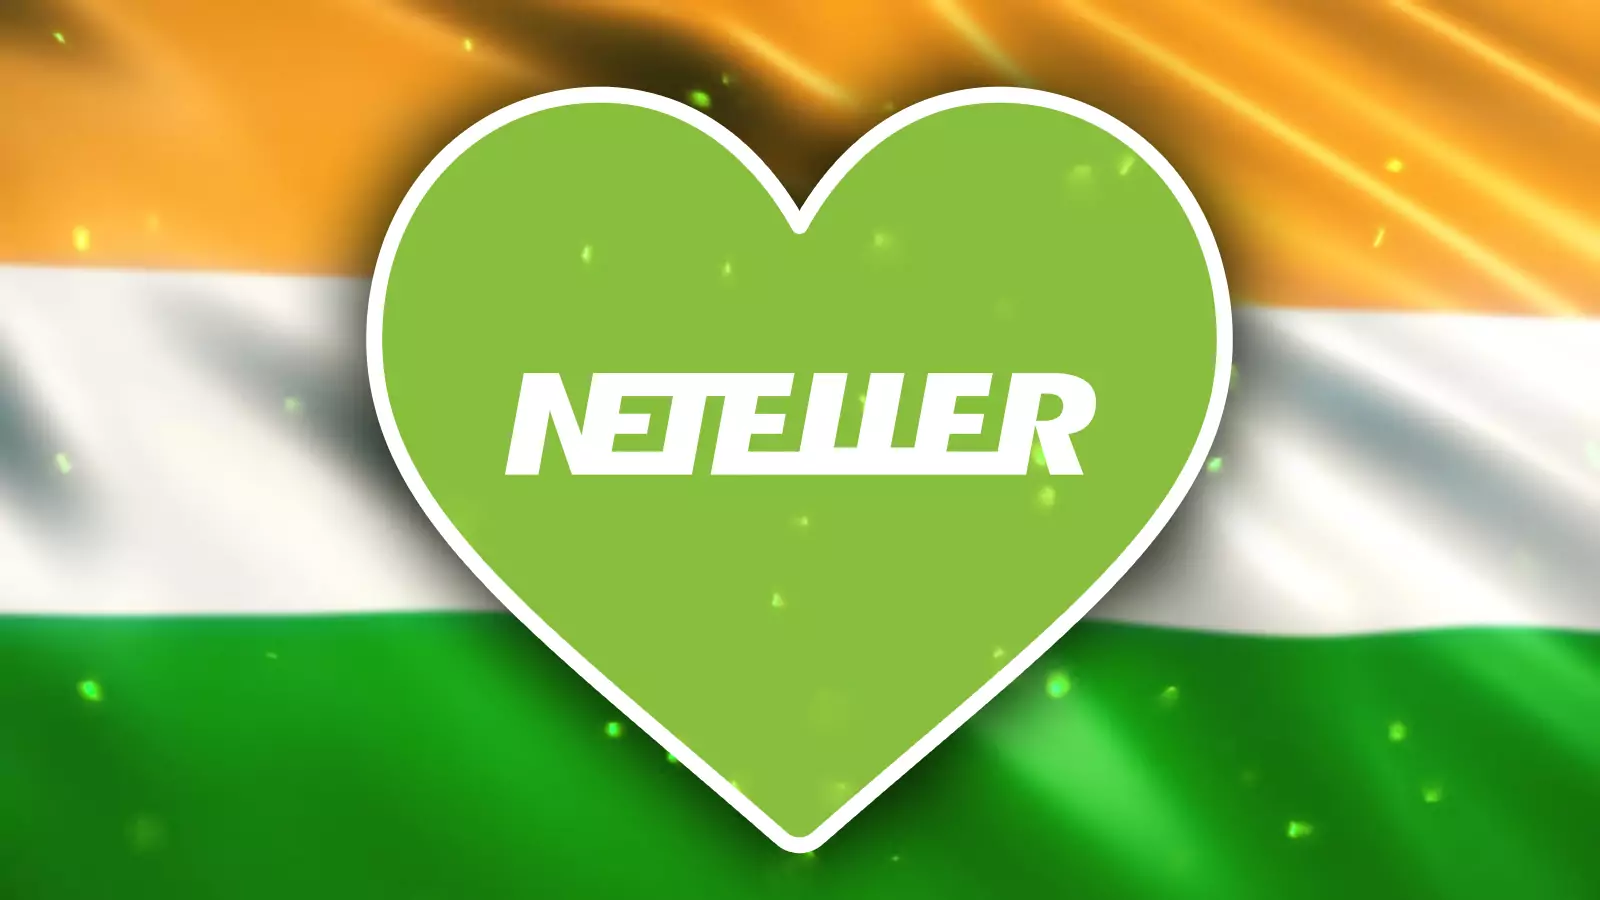 Feel free to make deposits on cricket betting sites via Neteller as it's a totally legal method.